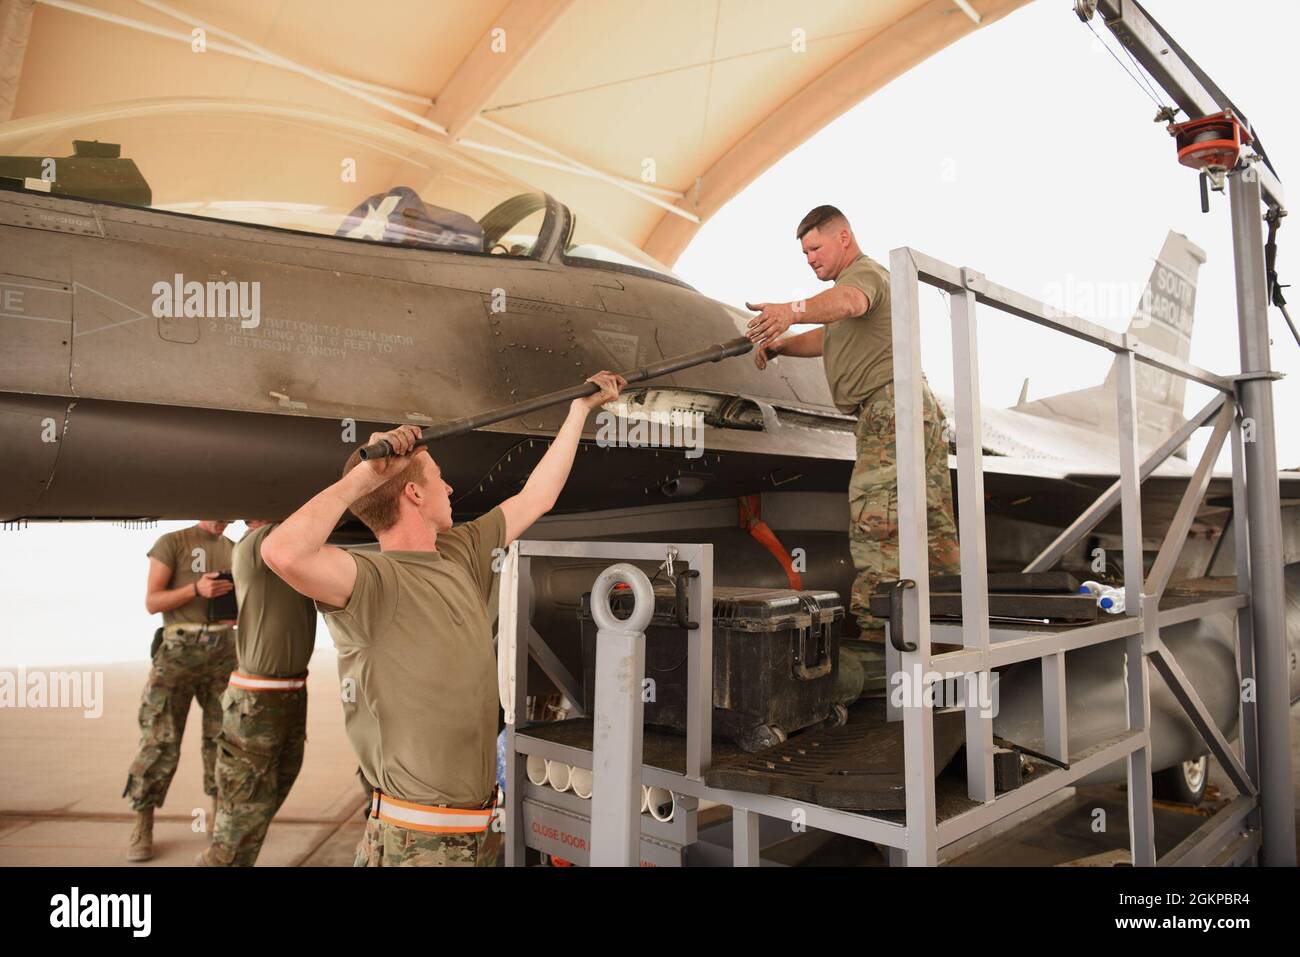 U.S. Air Force Master Sgt. Adam Chavis (right), receives the barrel of an M61A1 Vulcan cannon from U.S. Air Force Airman 1st Class Brice Padgett, 378th Expeditionary Maintenance Squadron armament backshop personnel, reinstalling an M61A1 Vulcan cannon into an F-16 Fighting Falcon fighter jet at Prince Sultan Air Base, Kingdom of Saudi Arabia, June 11, 2021. The 'Swamp Fox' Airmen from the South Carolina Air National Guard are deployed to PSAB to project combat power and help bolster defensive capabilities against potential threats in the region. Stock Photo